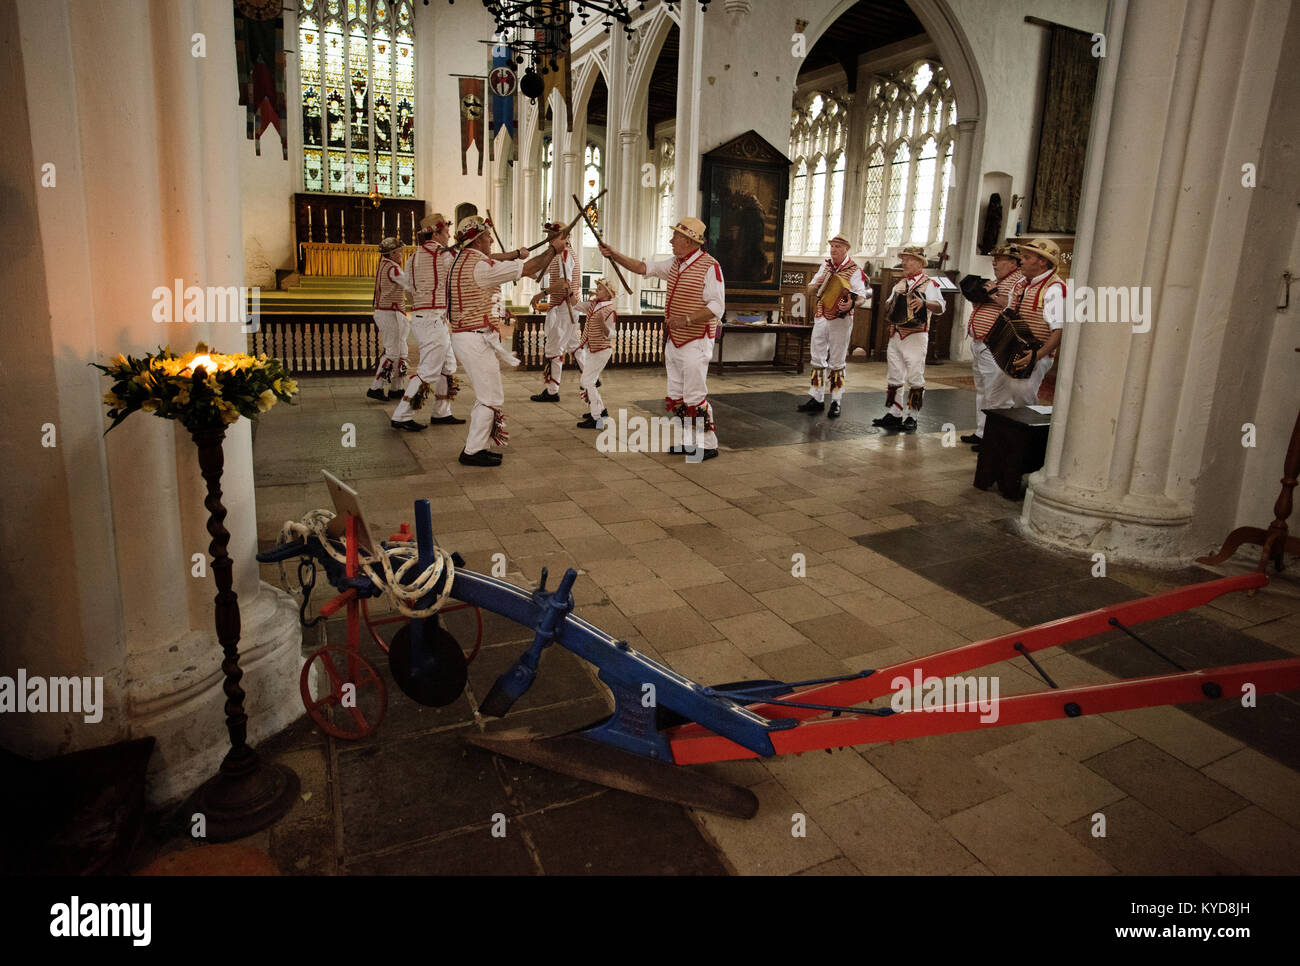 Plough Sunday, Thaxted Essex UK. 14 January 2018.  Thaxted Morris Men perform a ploughing dance in Thaxted parrish Church onPlough Sunday which is a traditional English celebration of the beginning of the agricultural year that has seen some revival over recent years. Plough Sunday celebrations usually involve bringing a ploughshare into a church with prayers for the blessing of the land. Accordingly, work in the fields did not begin until Plough Monday. Credit: BRIAN HARRIS/Alamy Live News Stock Photo